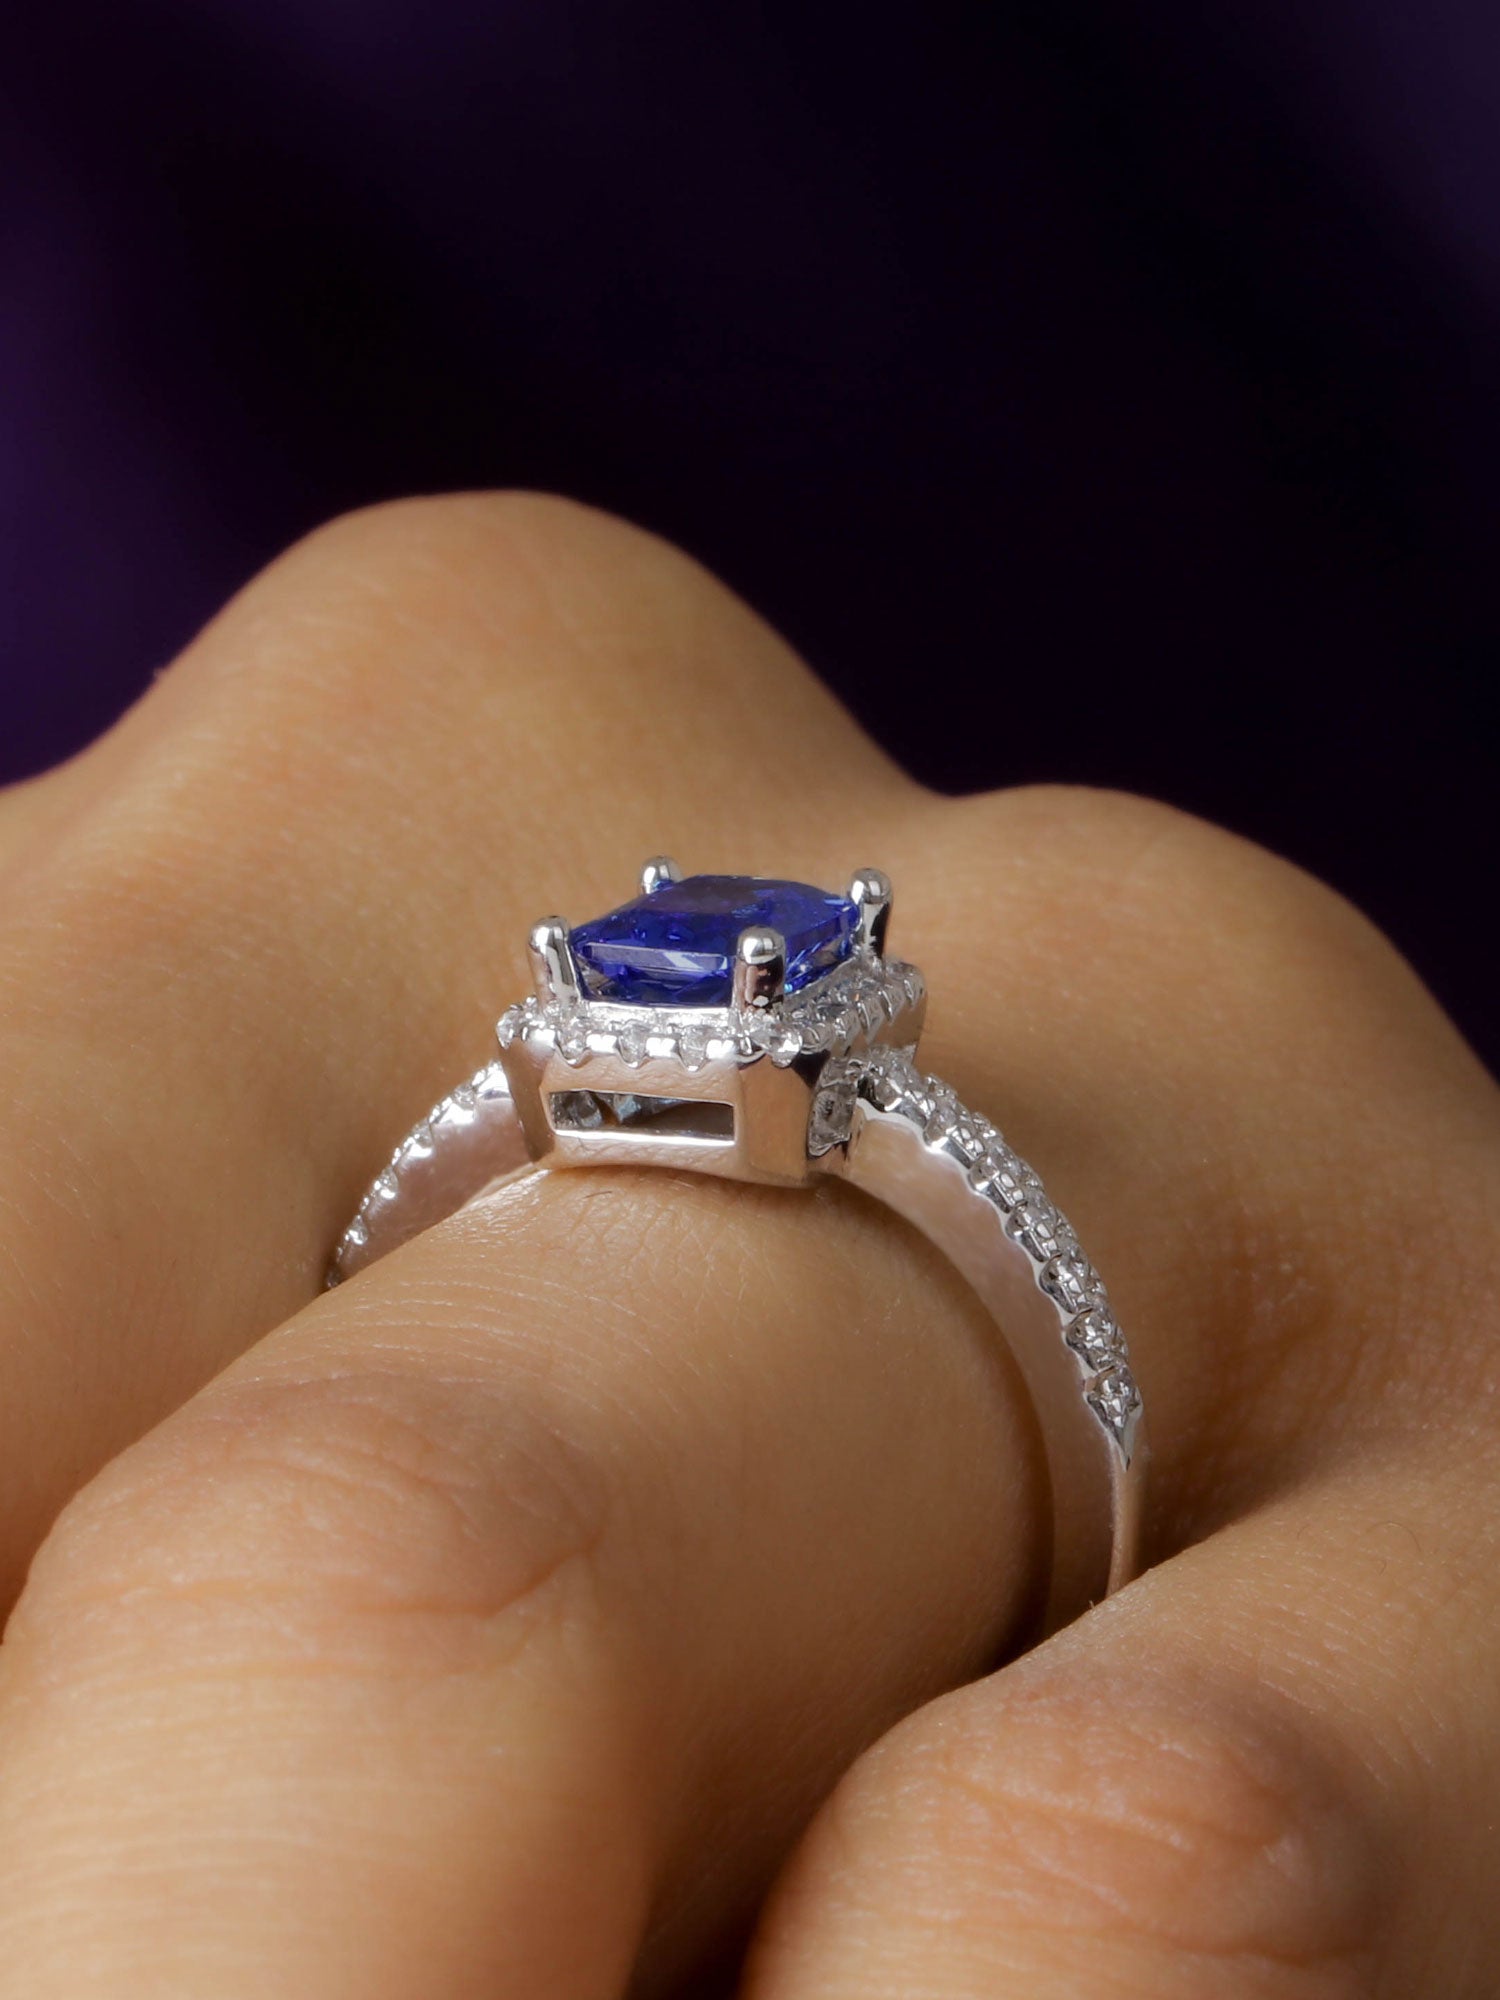 OCATGON LAB CREATED BLUE SAPPHIRE RING FOR HER-4